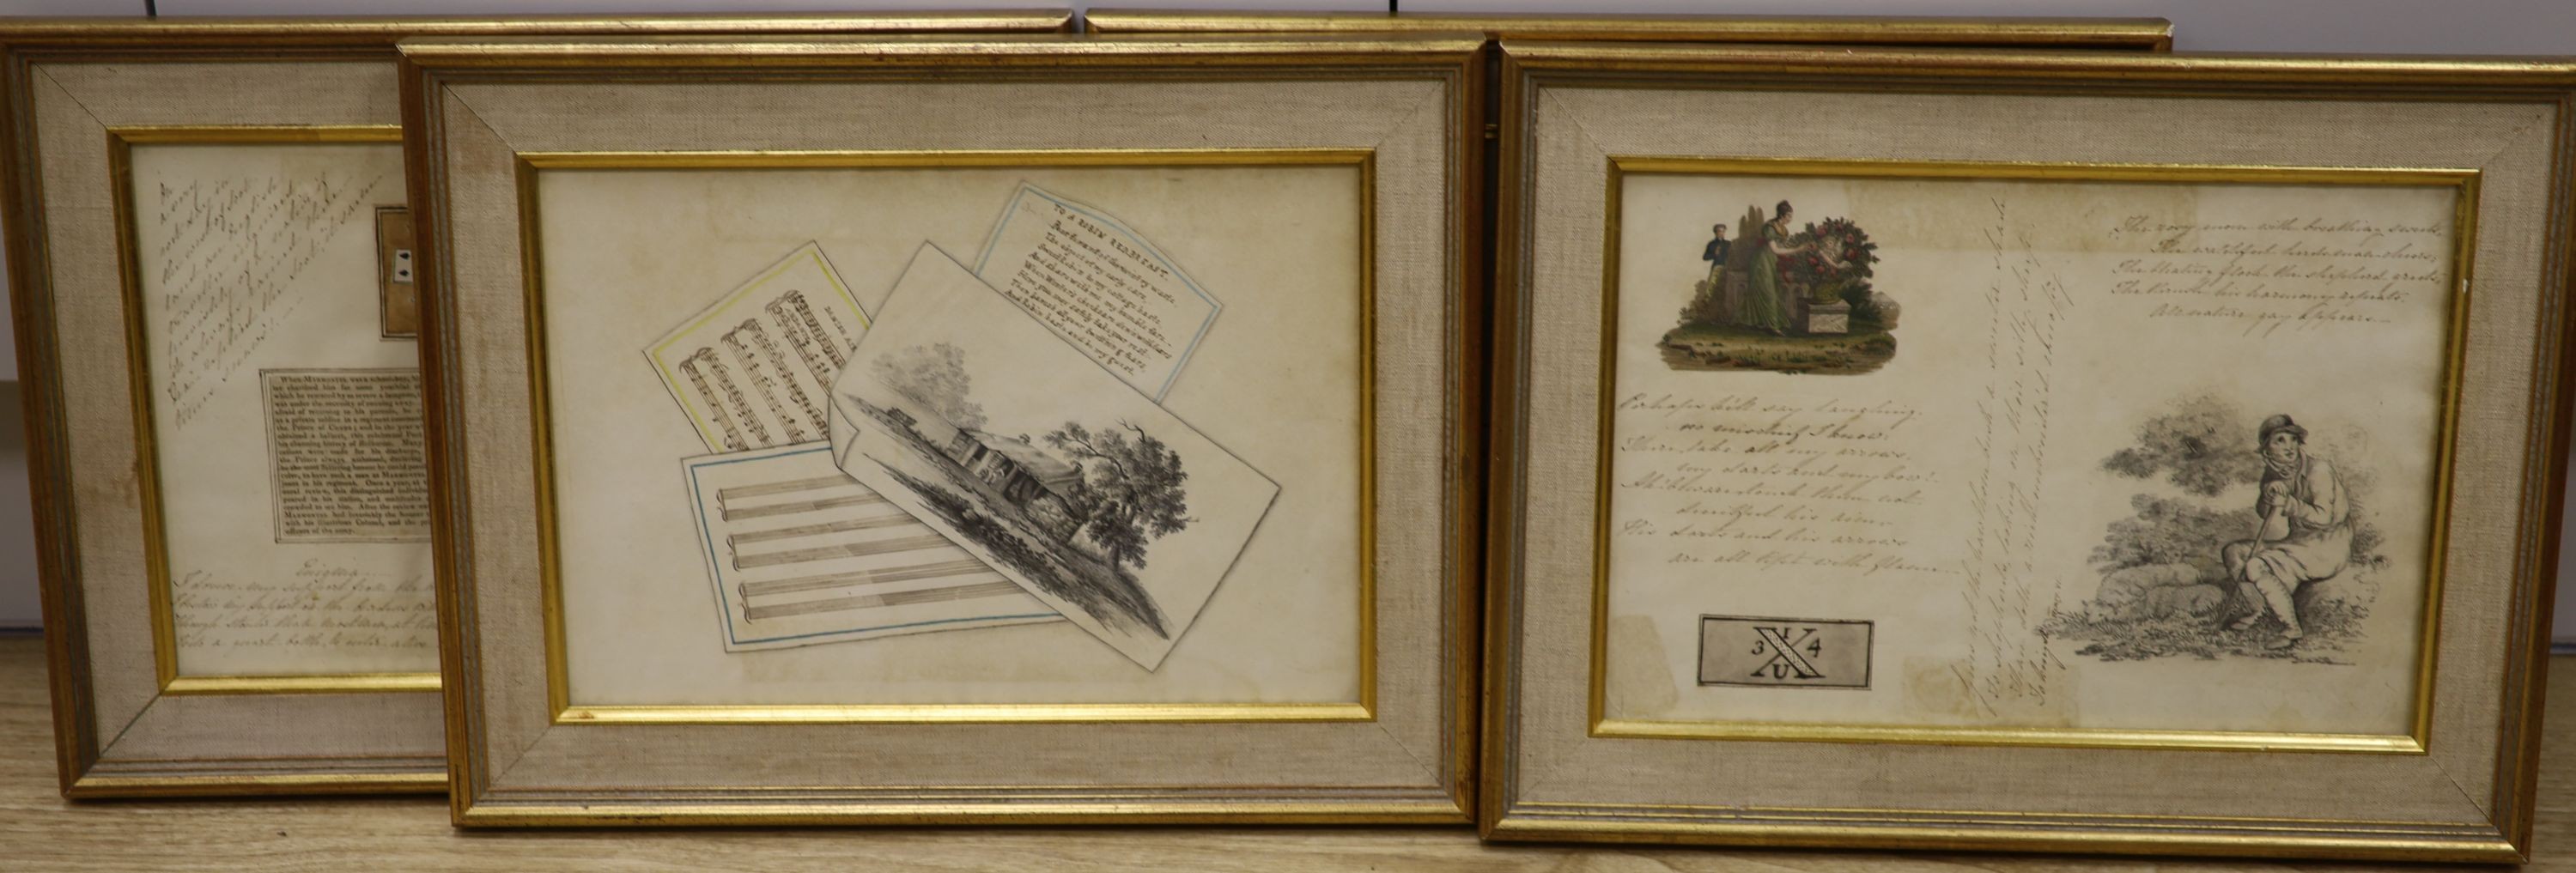 19th century English School, set of clin d’oeuil watercolour and collage panels, Poems, verses,